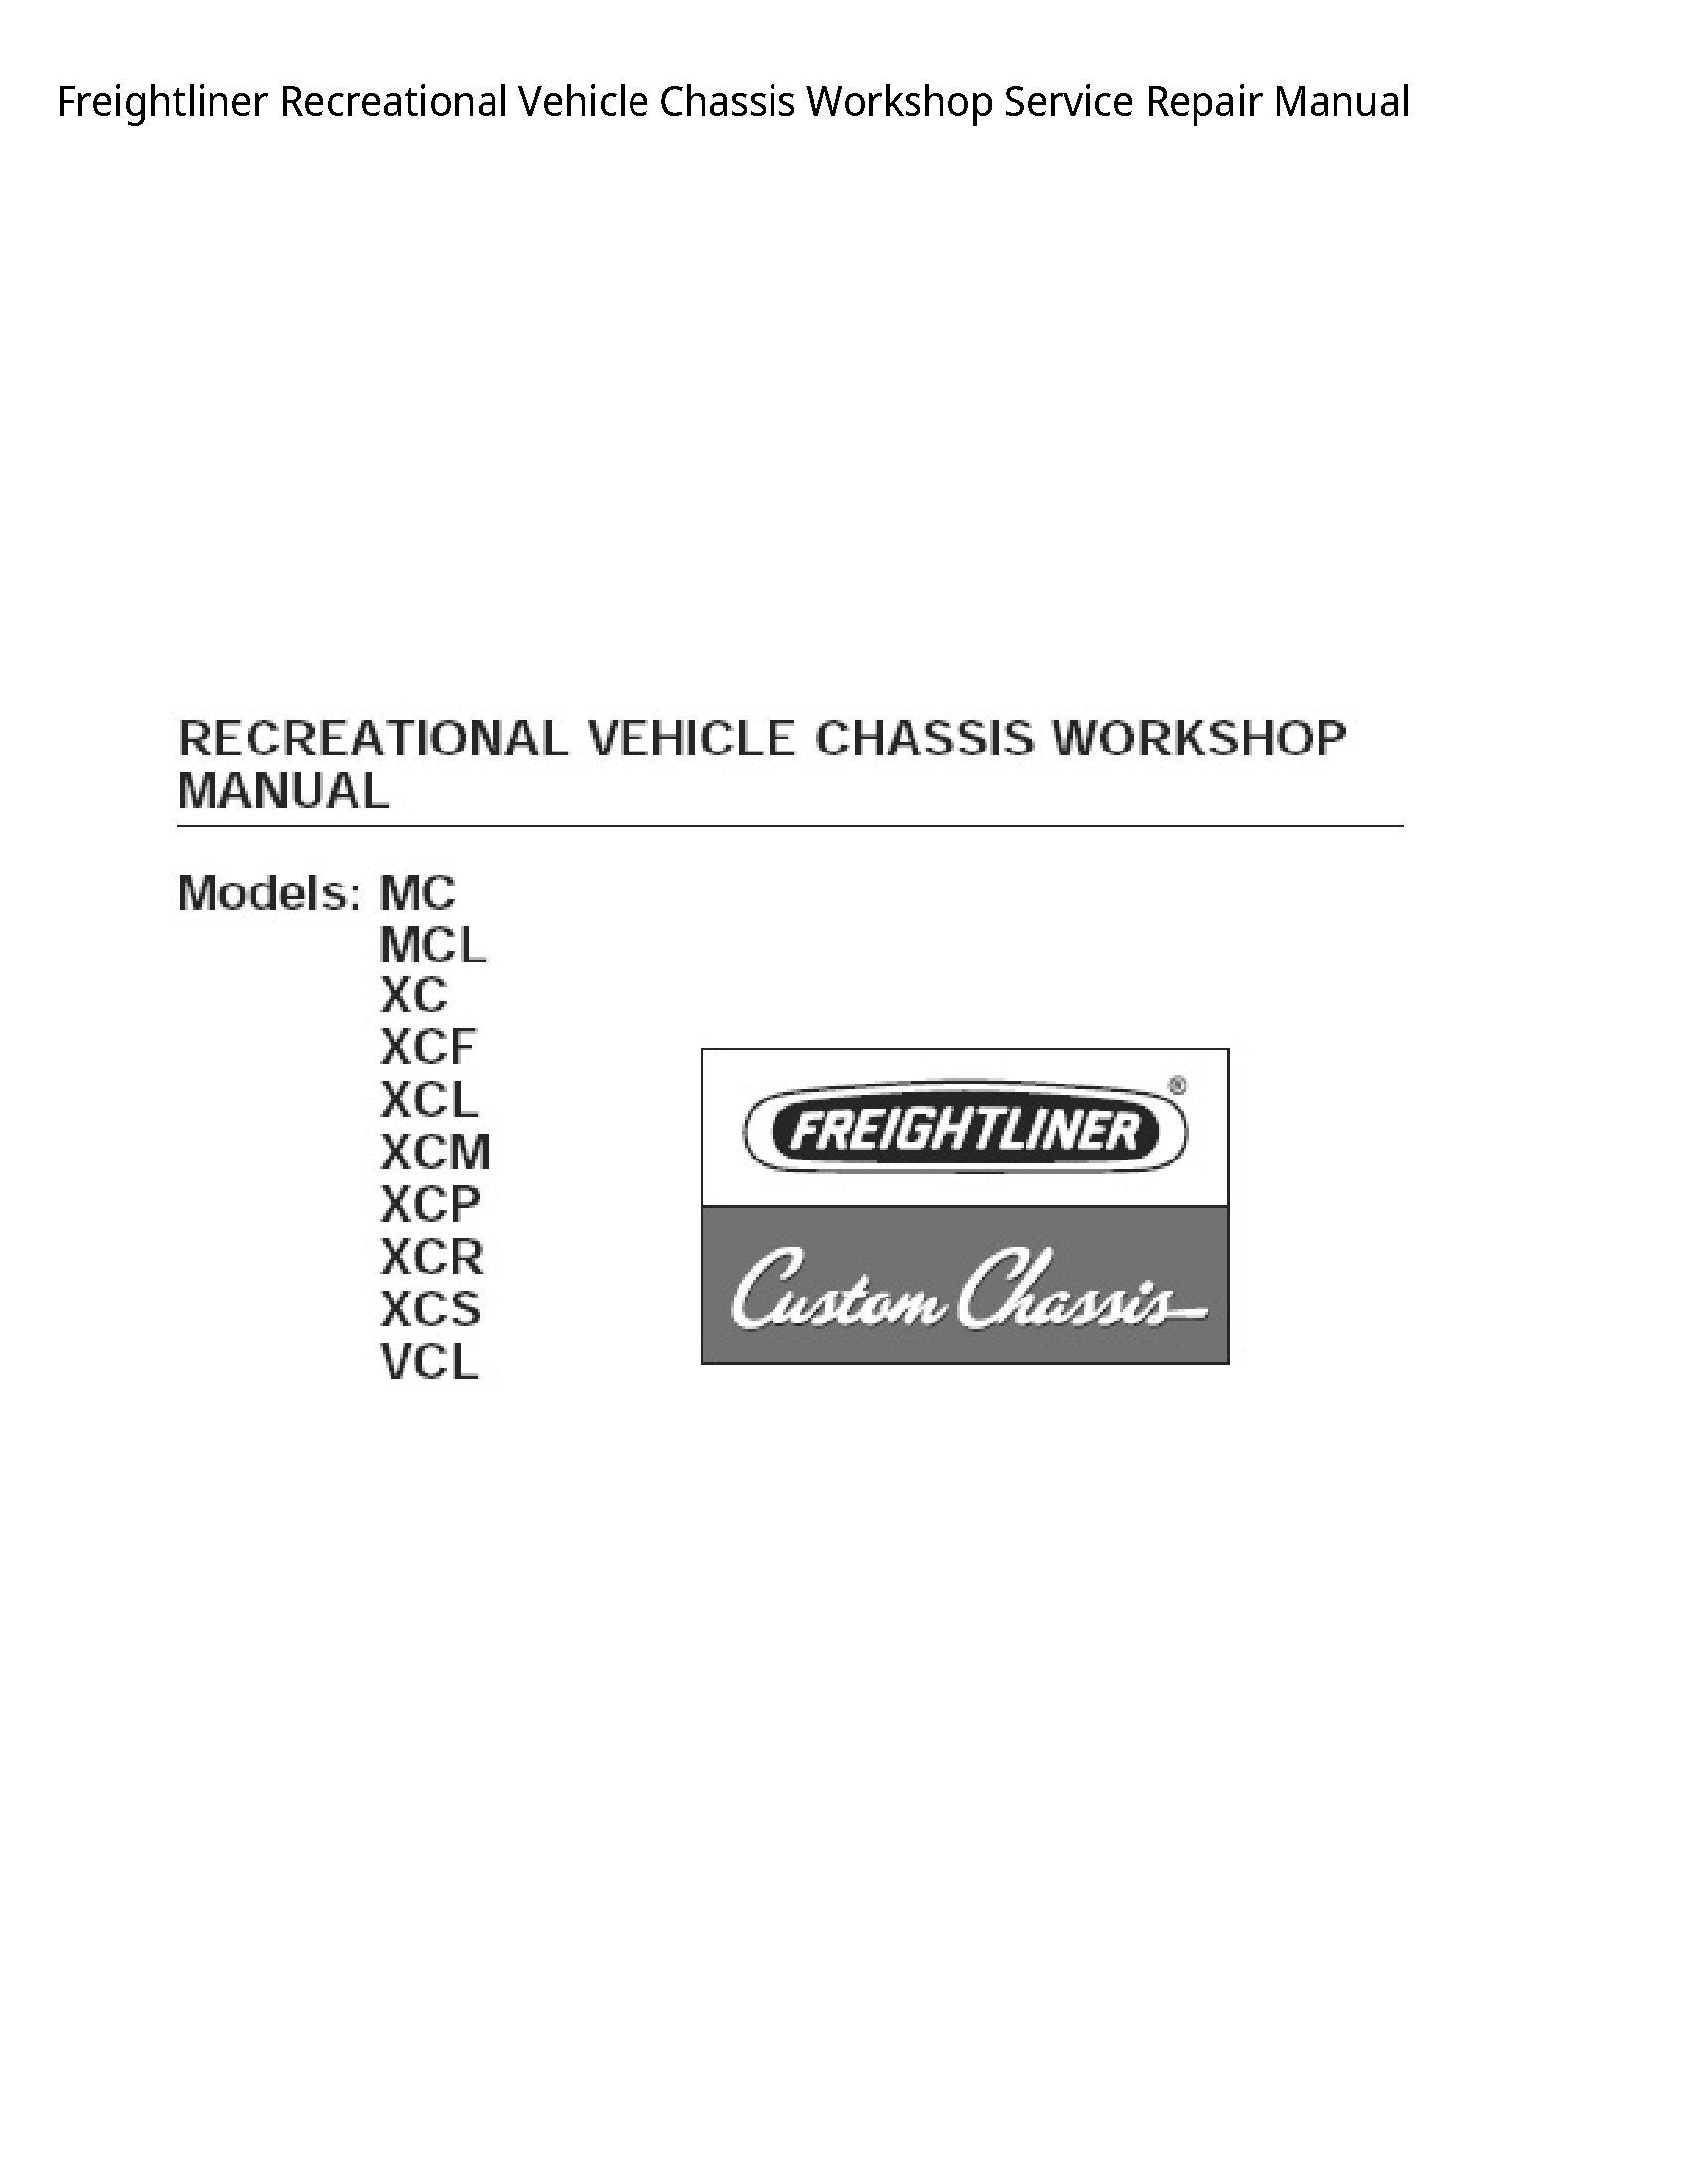 Freightliner Recreational Vehicle Chassis manual